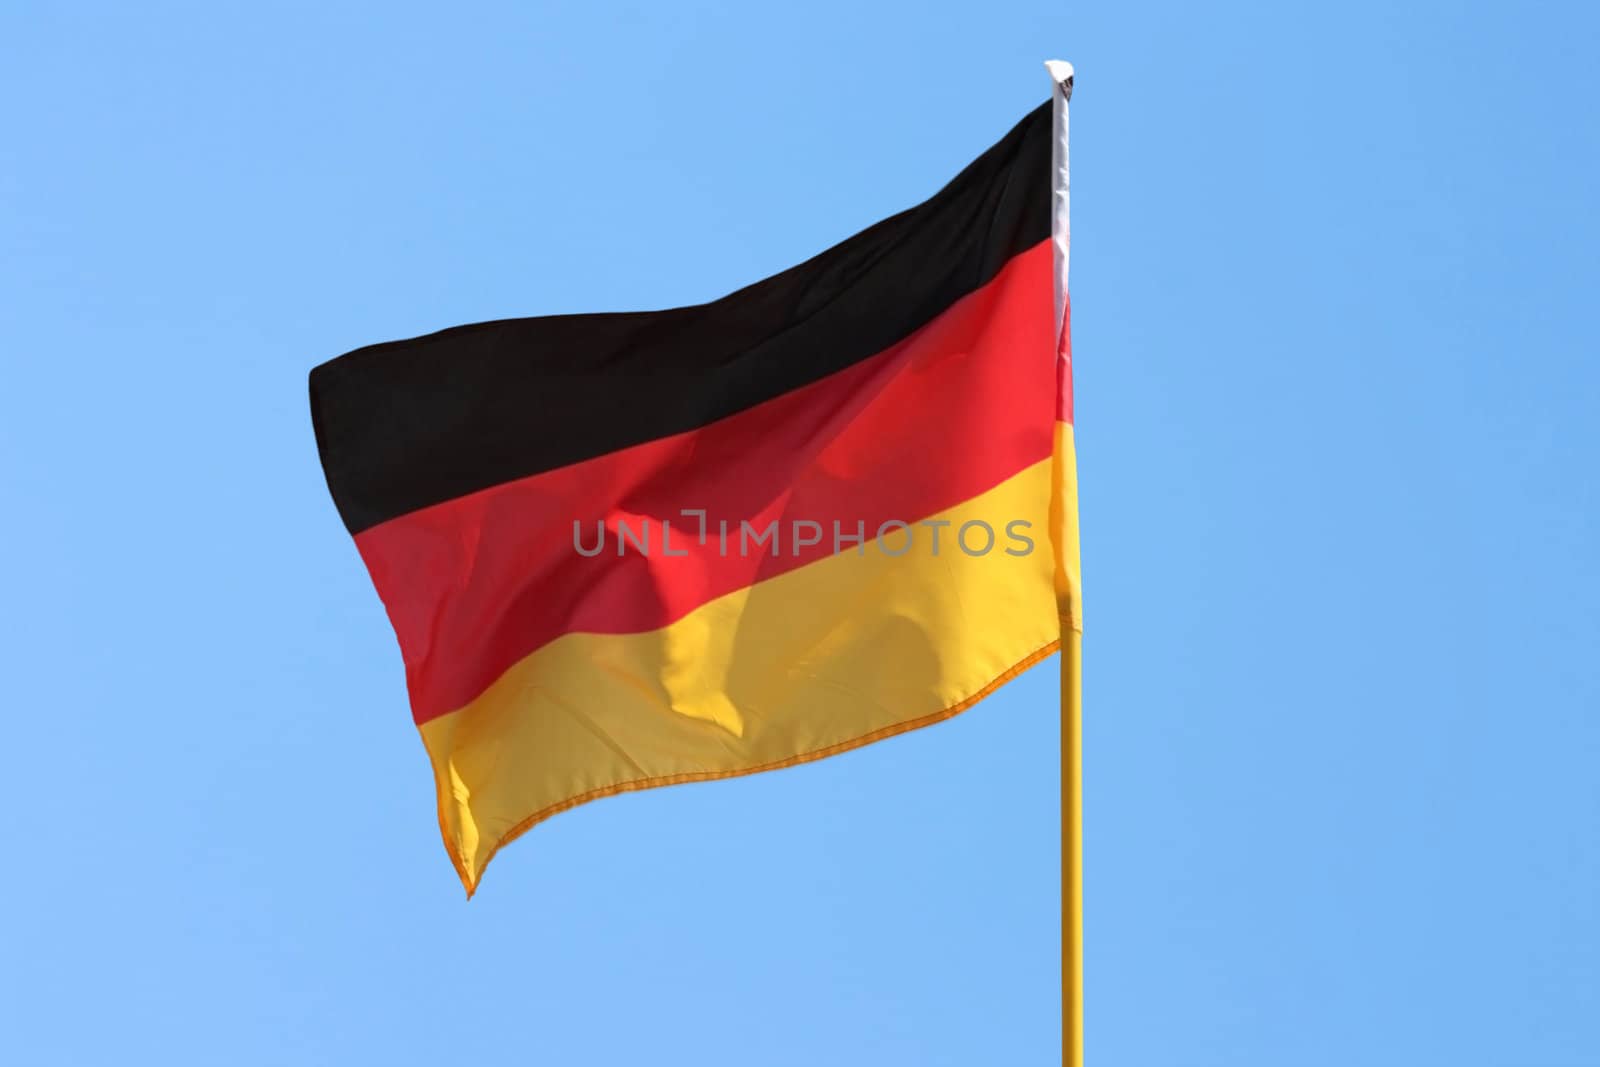 This image shows a German flag head to wind